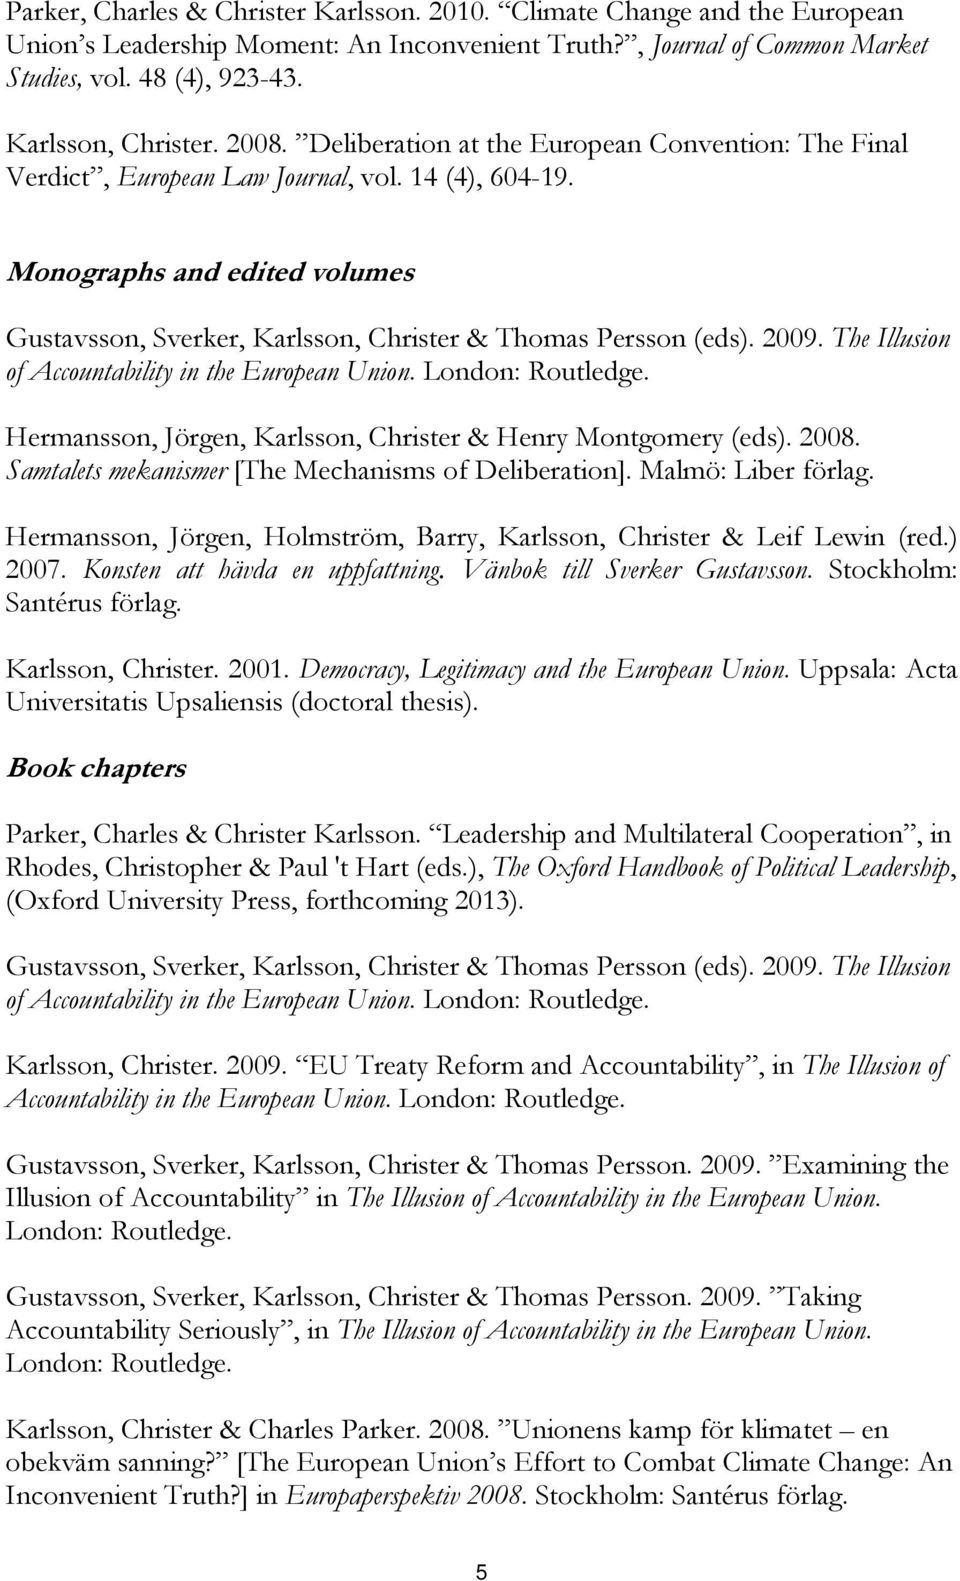 Monographs and edited volumes Gustavsson, Sverker, Karlsson, Christer & Thomas Persson (eds). 2009. The Illusion of Accountability in the European Union. London: Routledge.